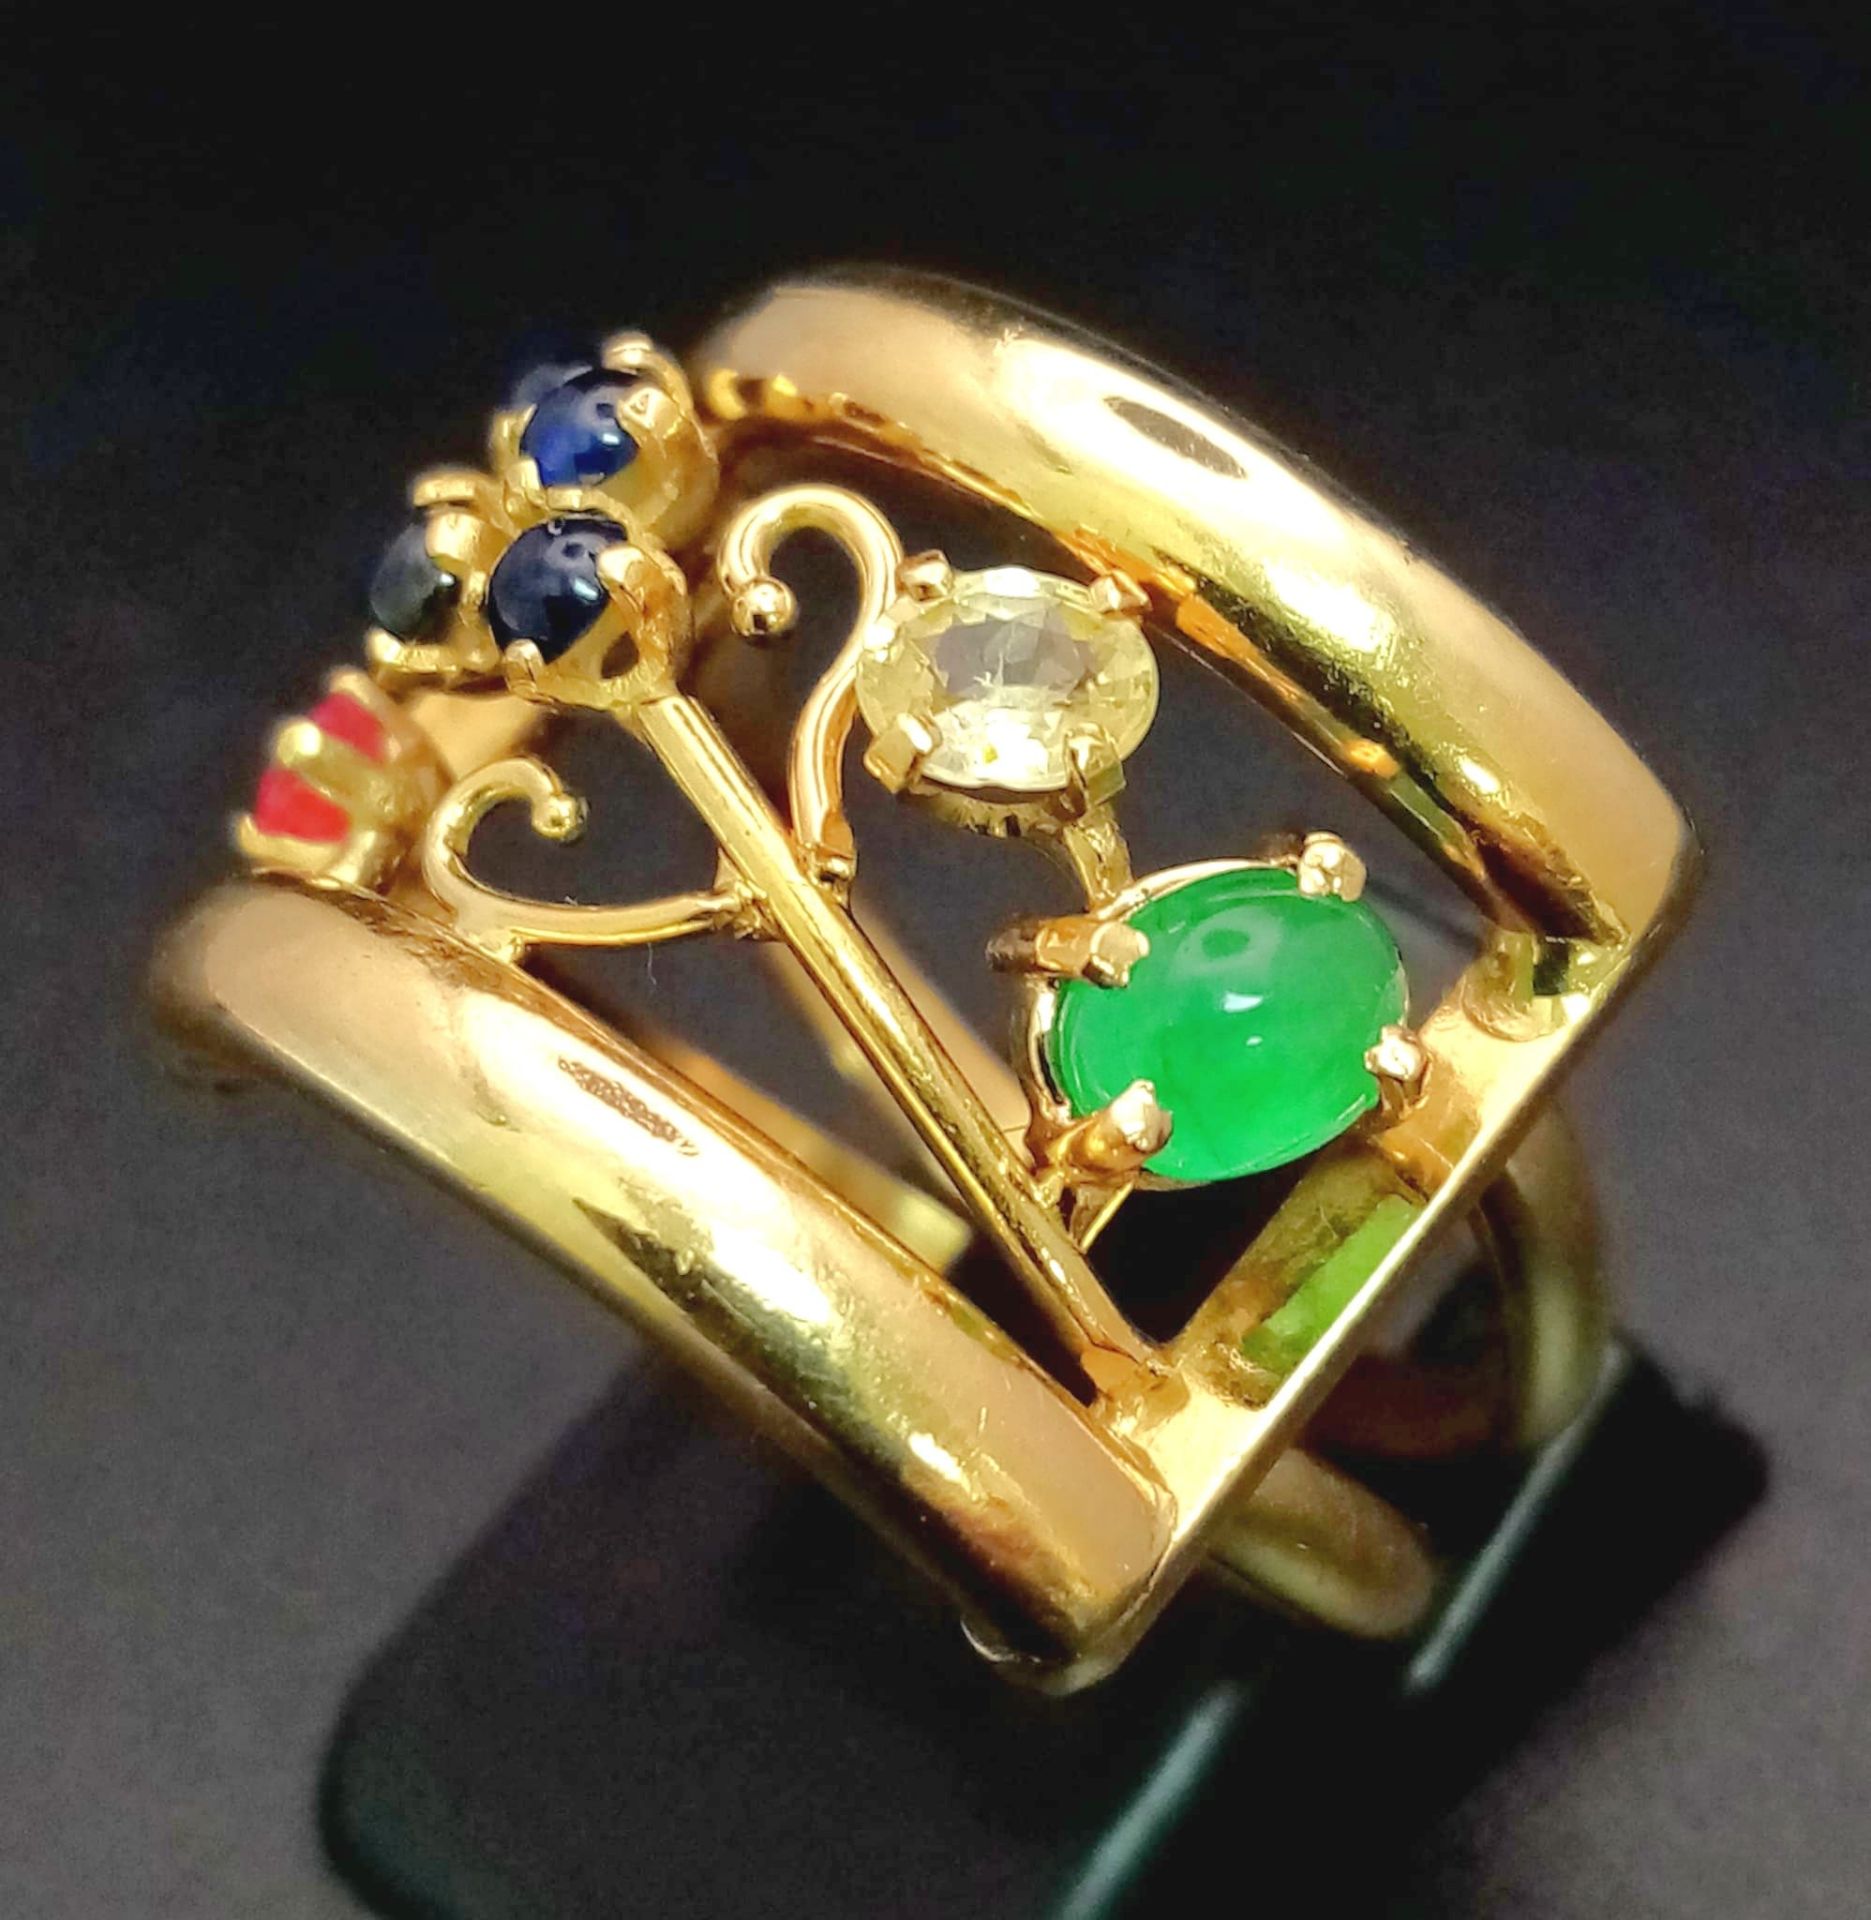 An 18 K yellow gold ring with an artistic design and adorned with an emerald cabochon, plus ruby, - Bild 4 aus 7